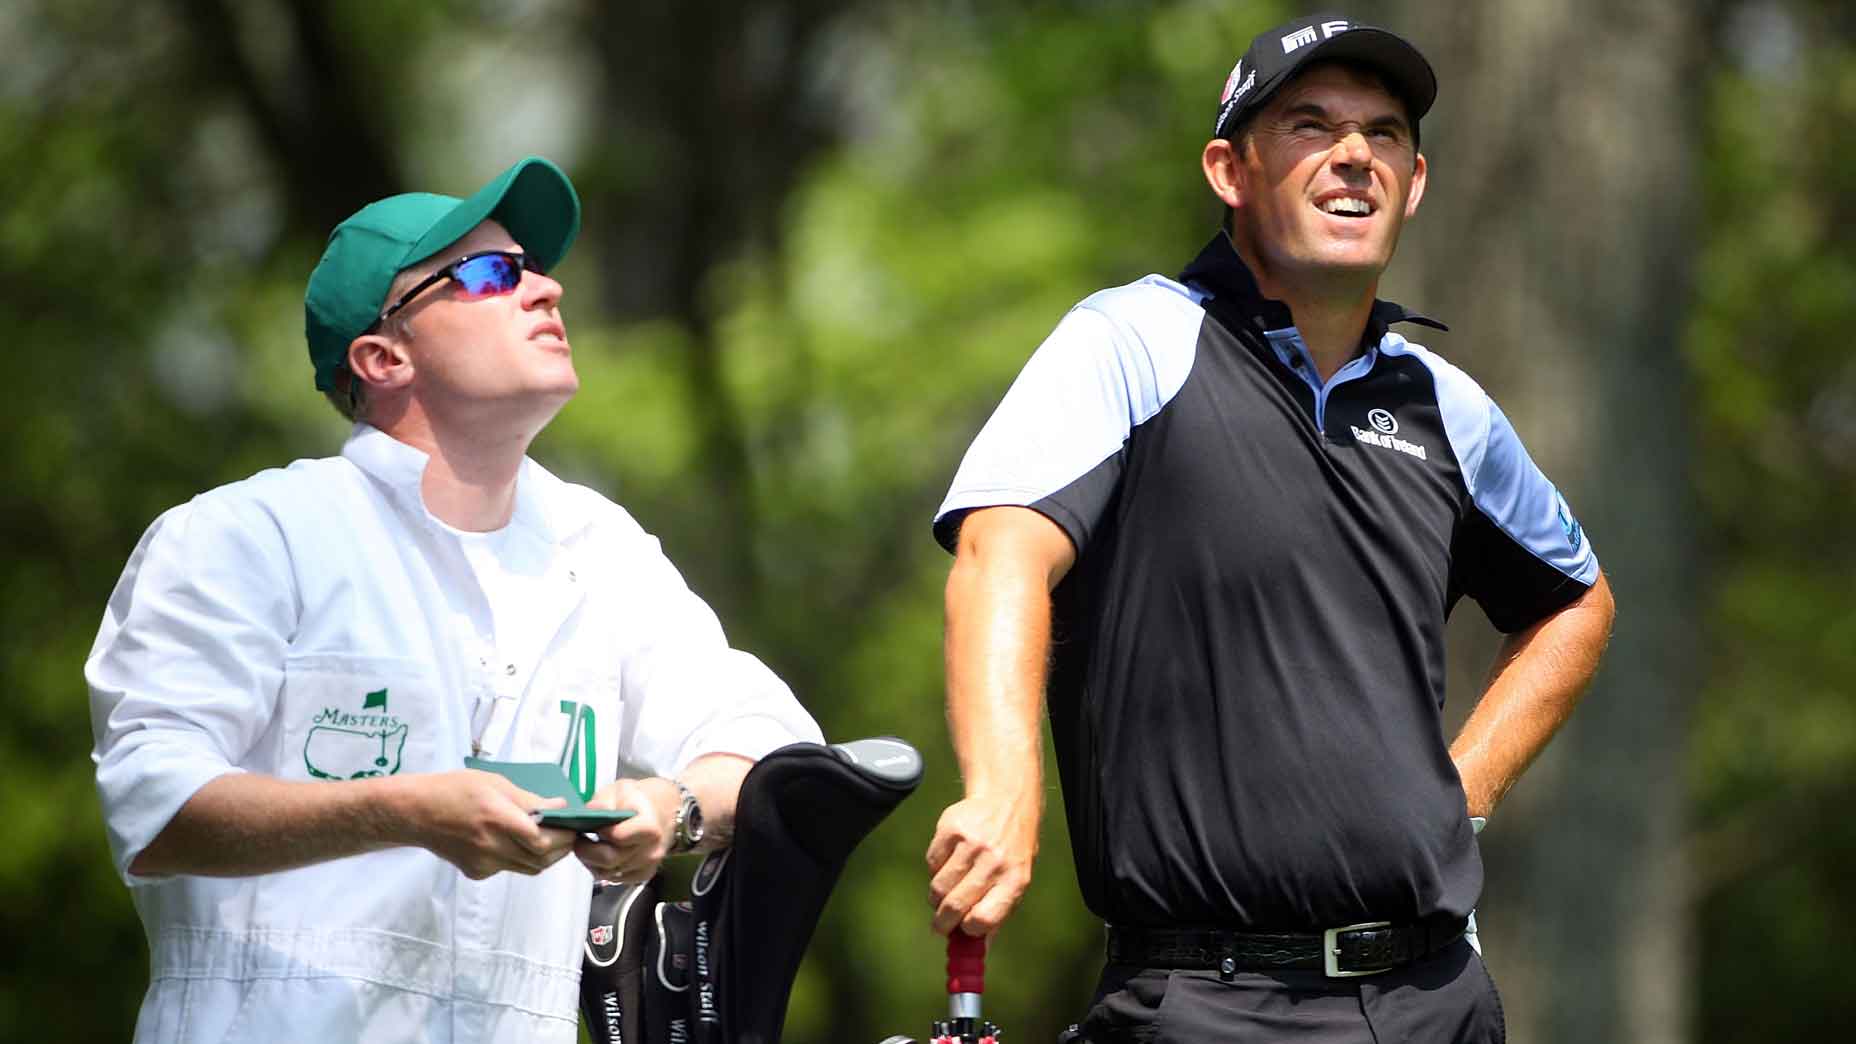 Padraig Harrington of Ireland and his caddie Ronin Flood wait on the second tee during the second round of the 2009 Masters Tournament at Augusta National Golf Club on April 10, 2009 in Augusta, Georgia